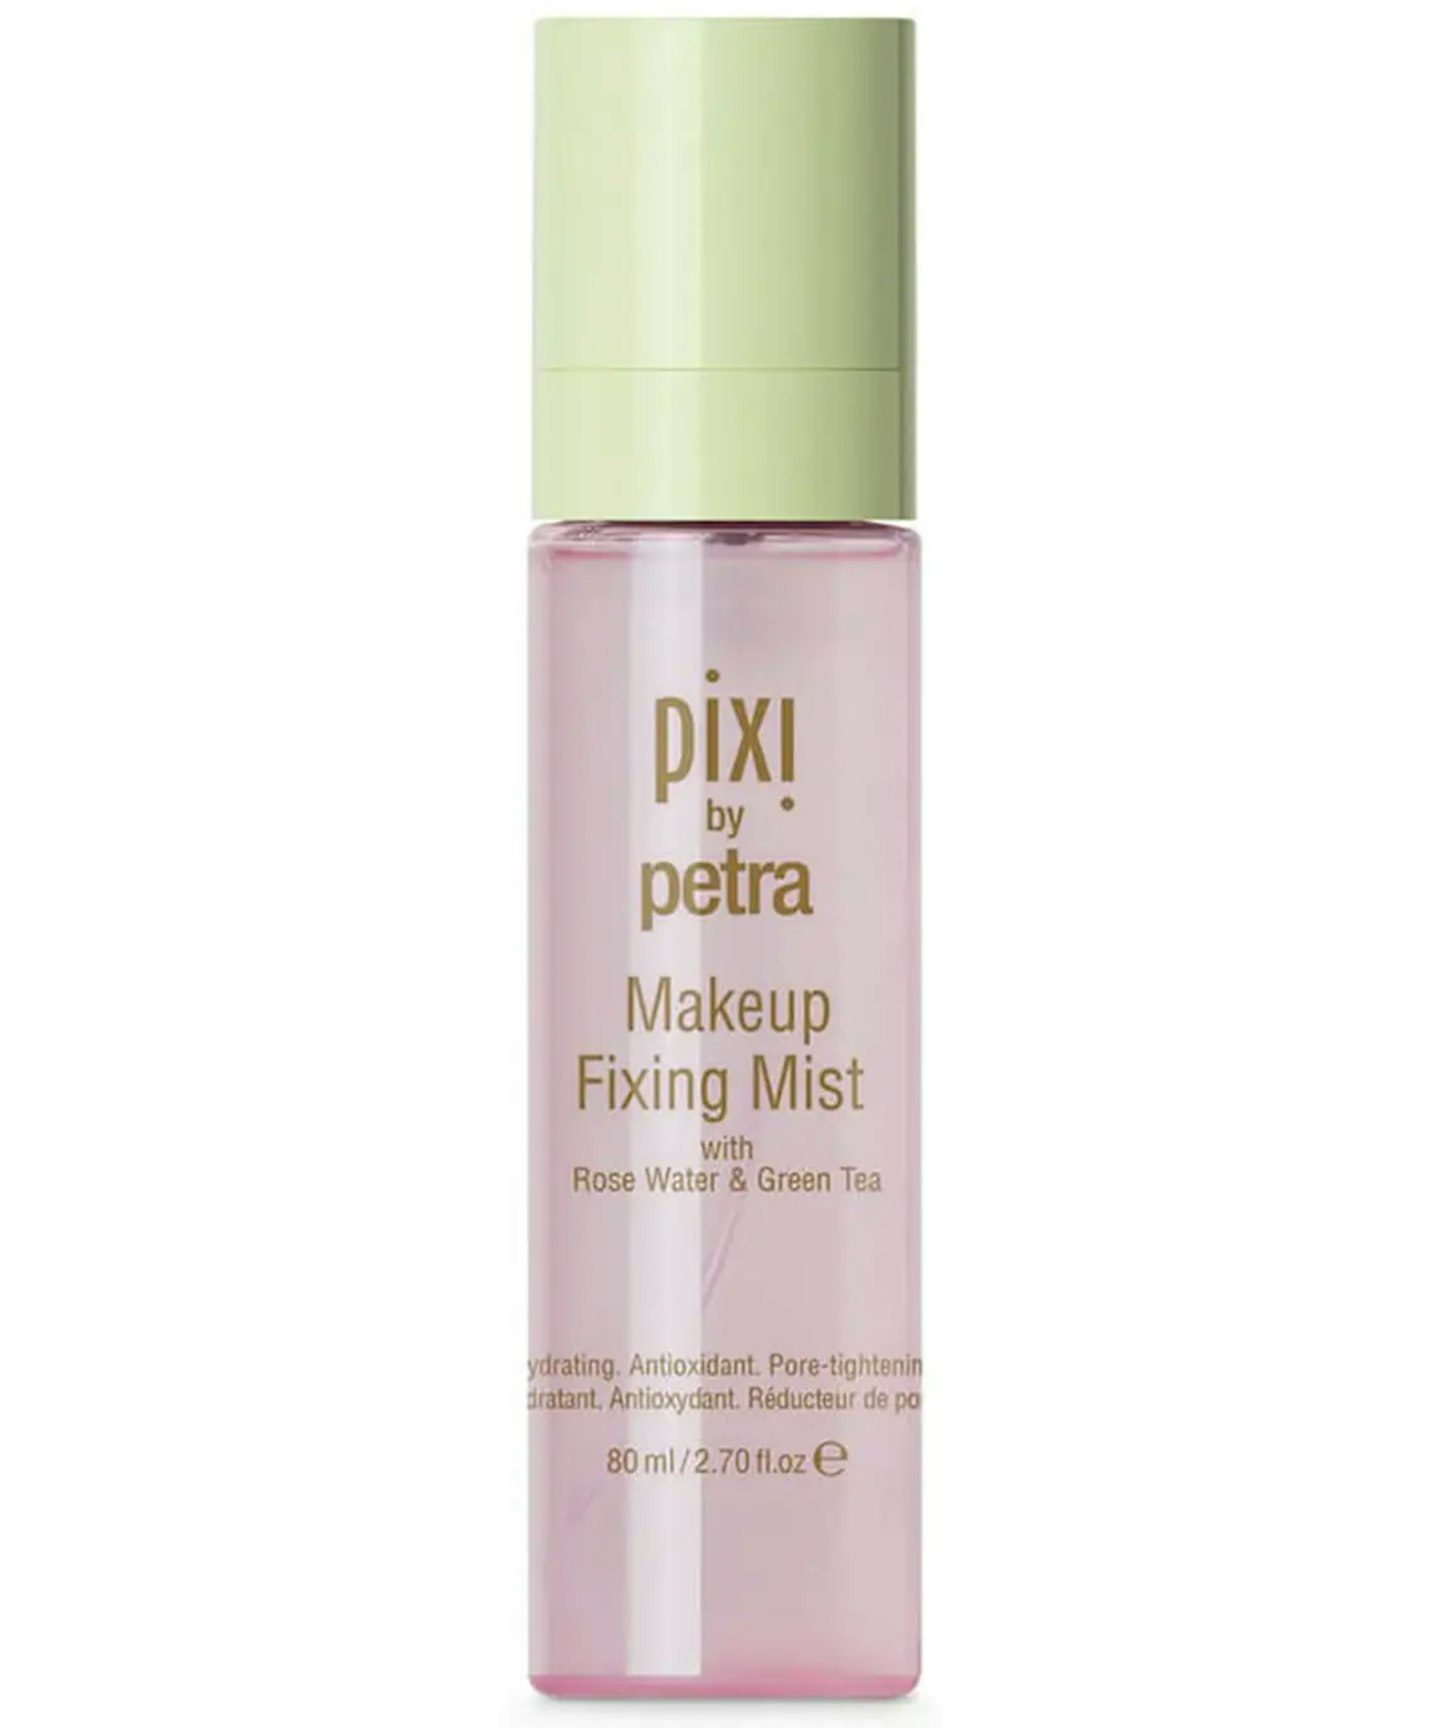 A picture of the Pixi Make-up Fixing Mist